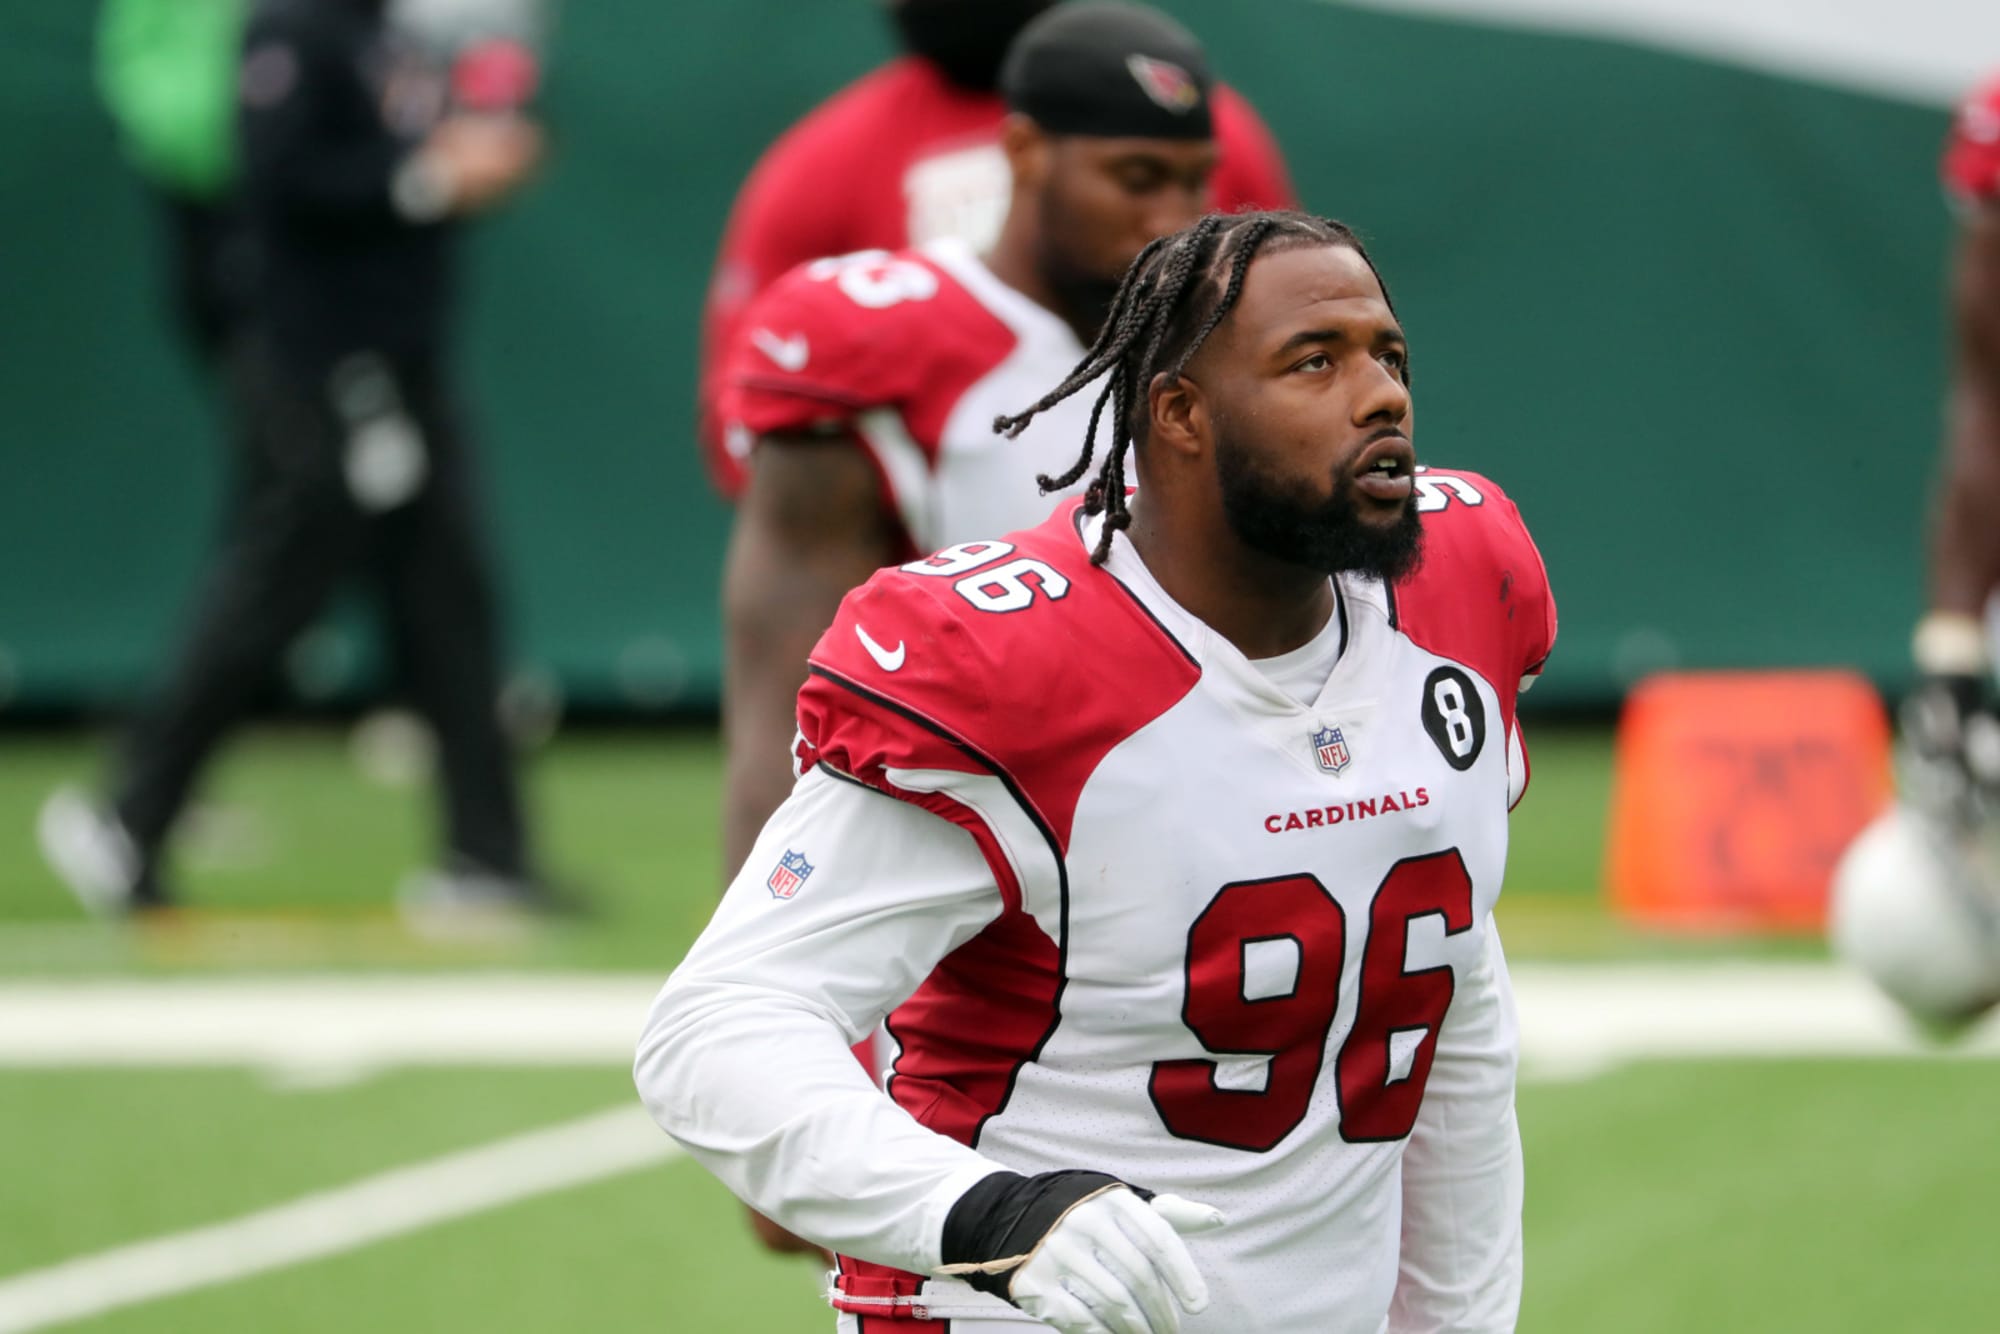 Angelo Blackson has played well for the Arizona Cardinals